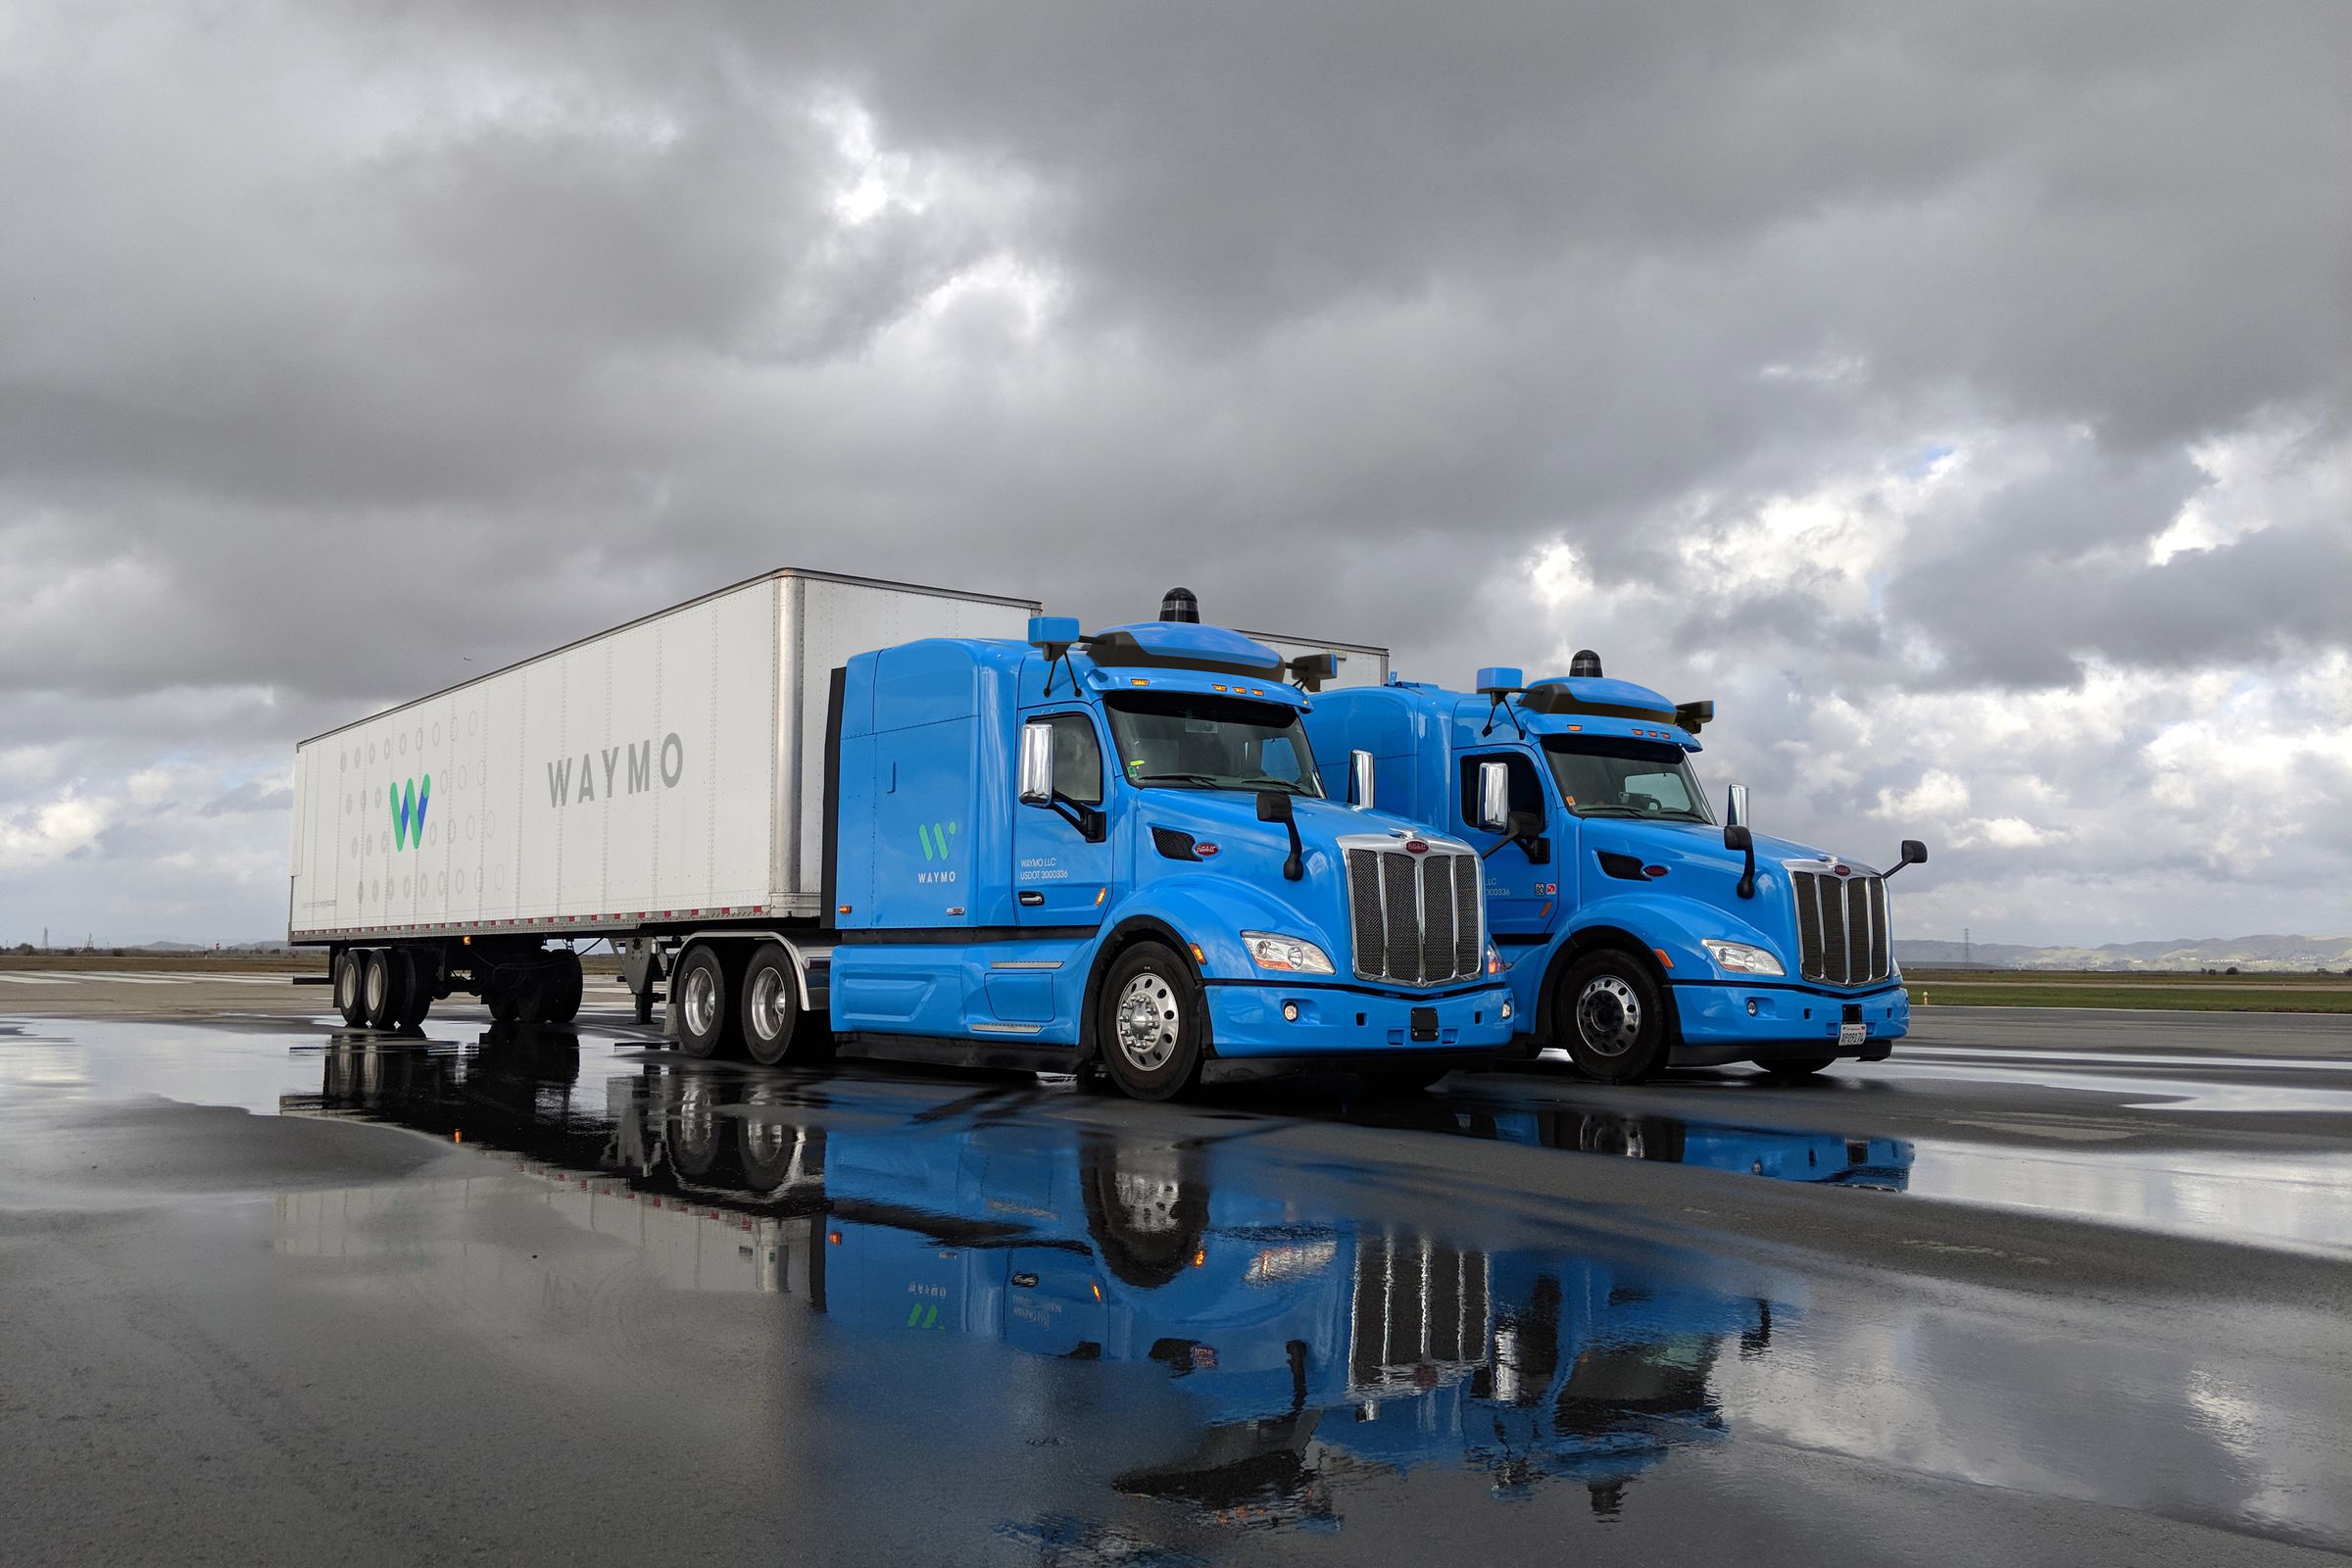 Two blue Waymo autonomous trucks next to one another on a cloudy, rainy day.